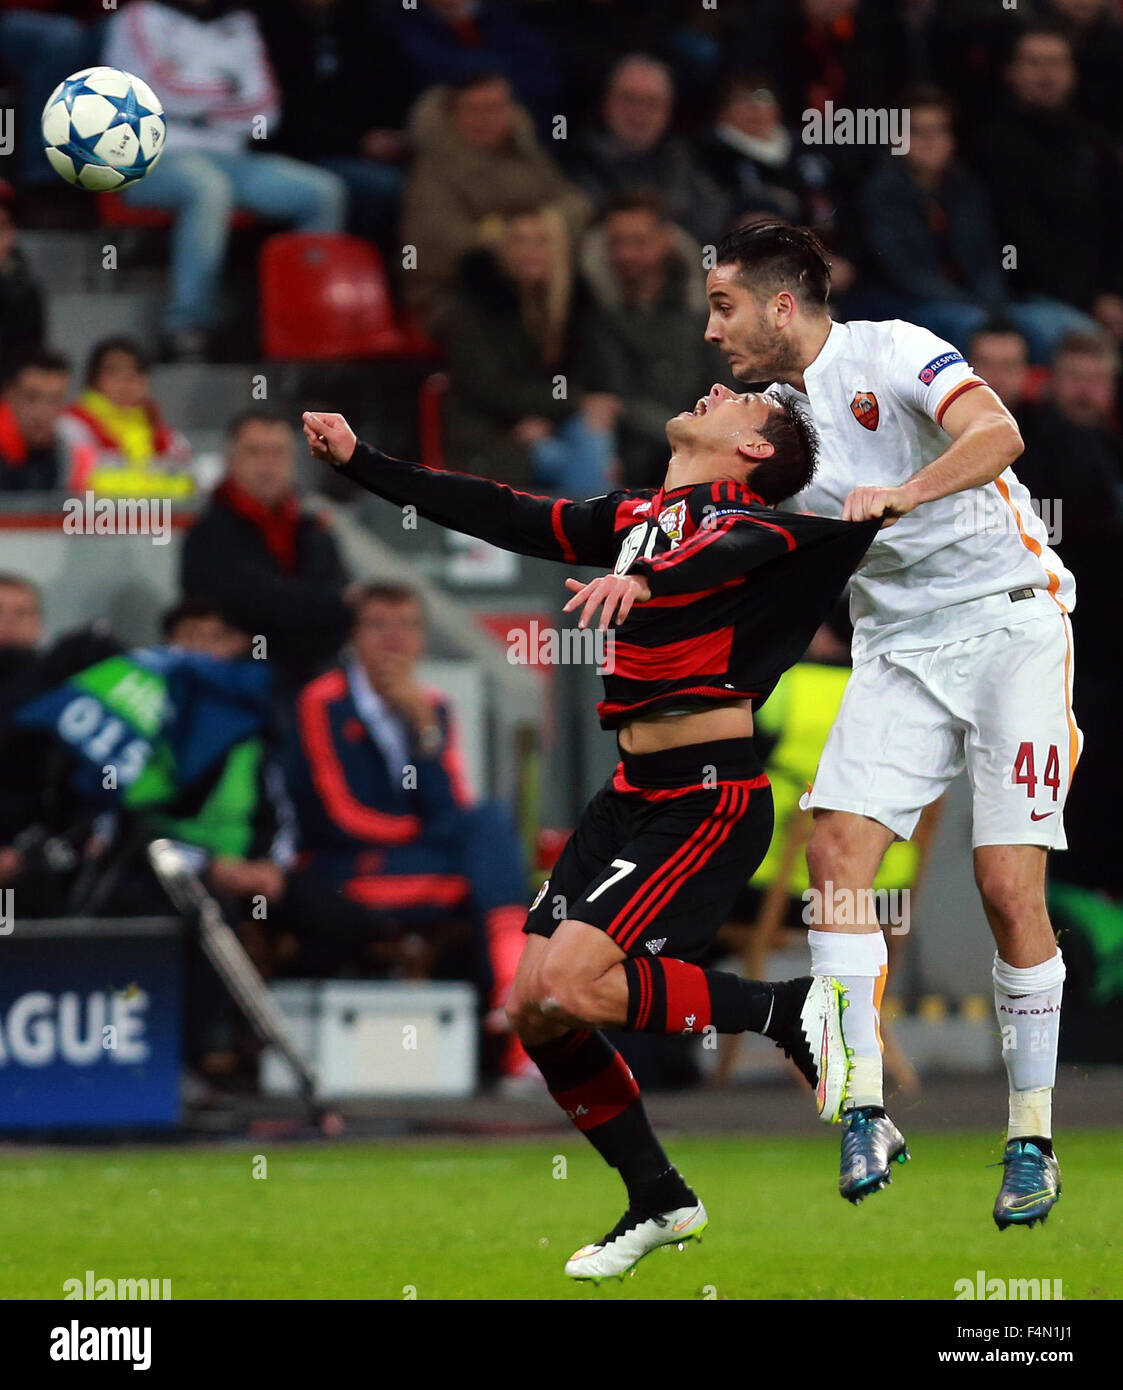 Leverkusen, Germany. 20th Oct, 2015. Javier Hernandez (L) of Leverkusen competes during the UEFA Champions League group E soccer match against Roma in Leverkusen, Germany, on Oct. 20, 2015. The match ended with a 4-4 draw. Credit:  Luo Huanhuan/Xinhua/Alamy Live News Stock Photo